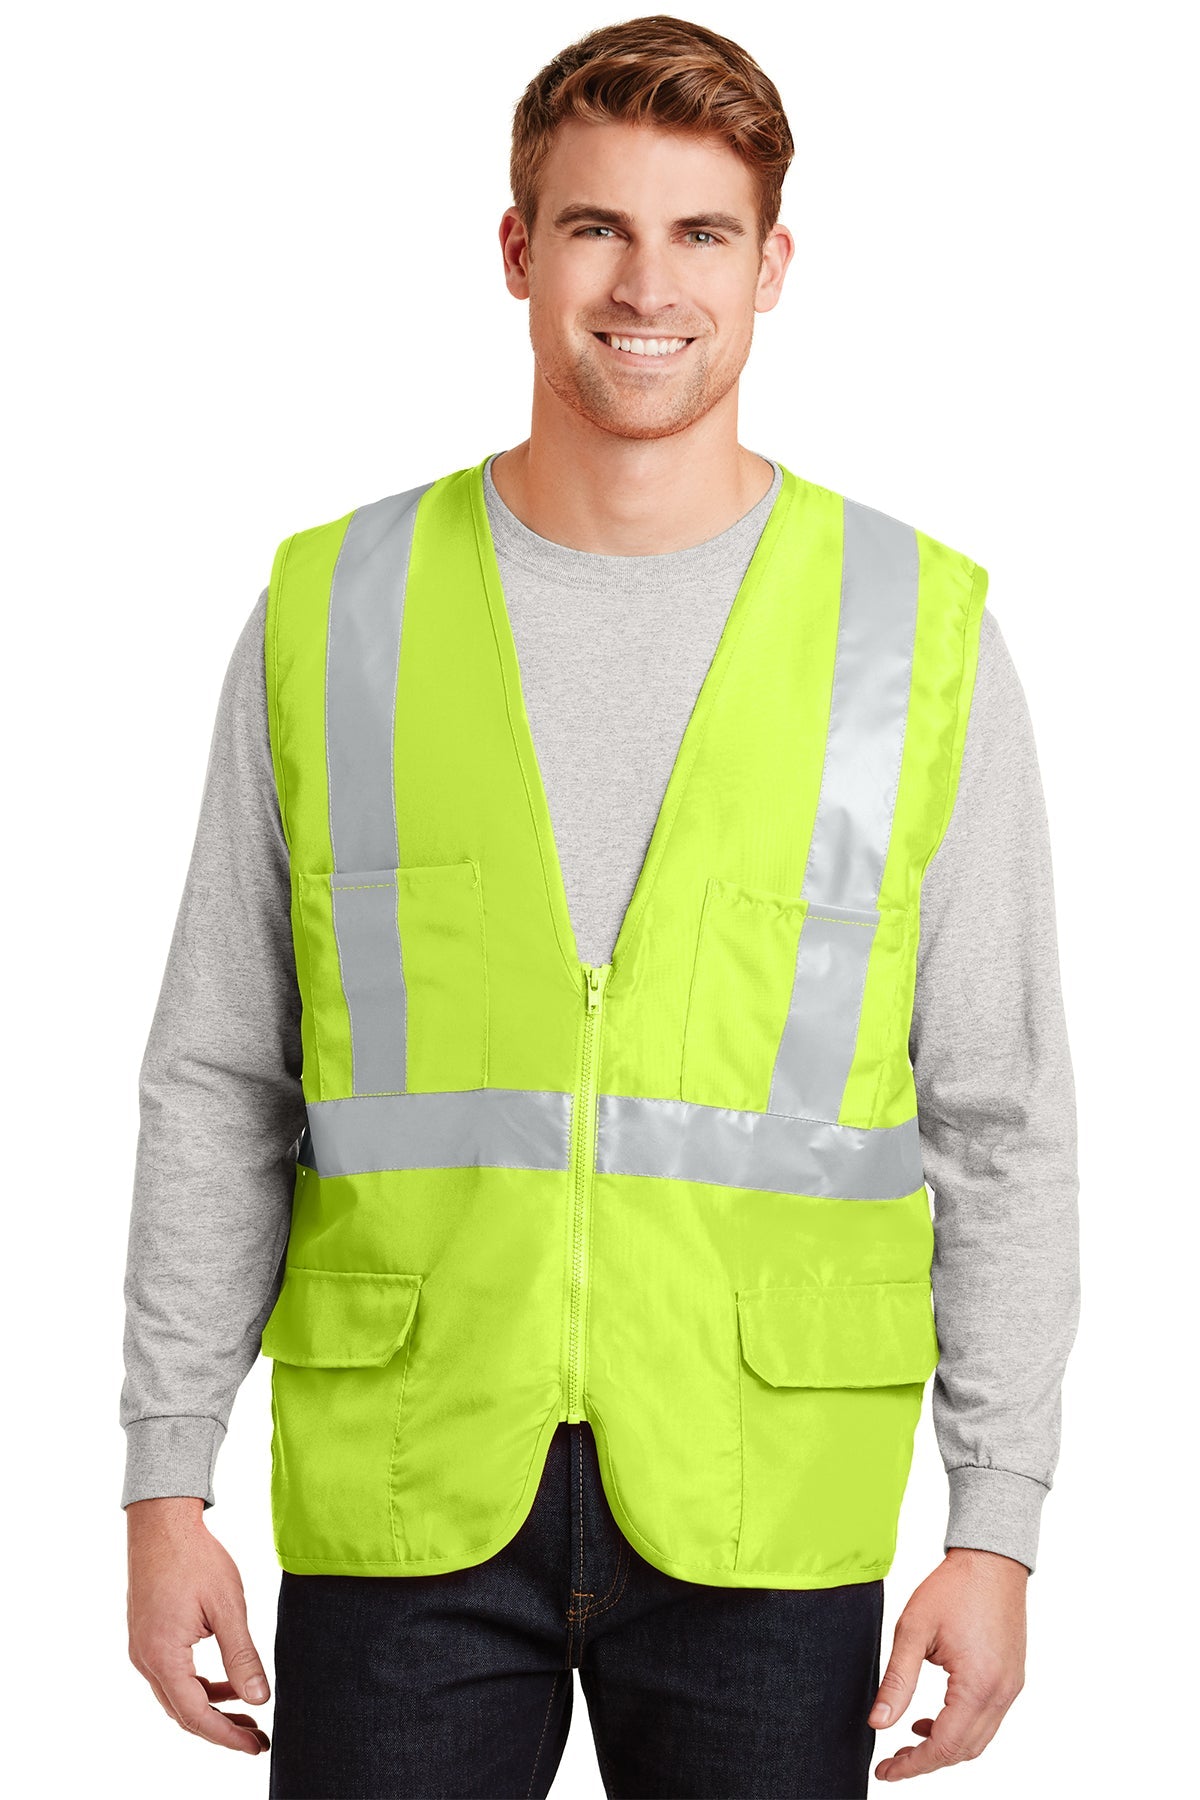 CornerStone Safety Yellow CSV405 embroidered team jackets